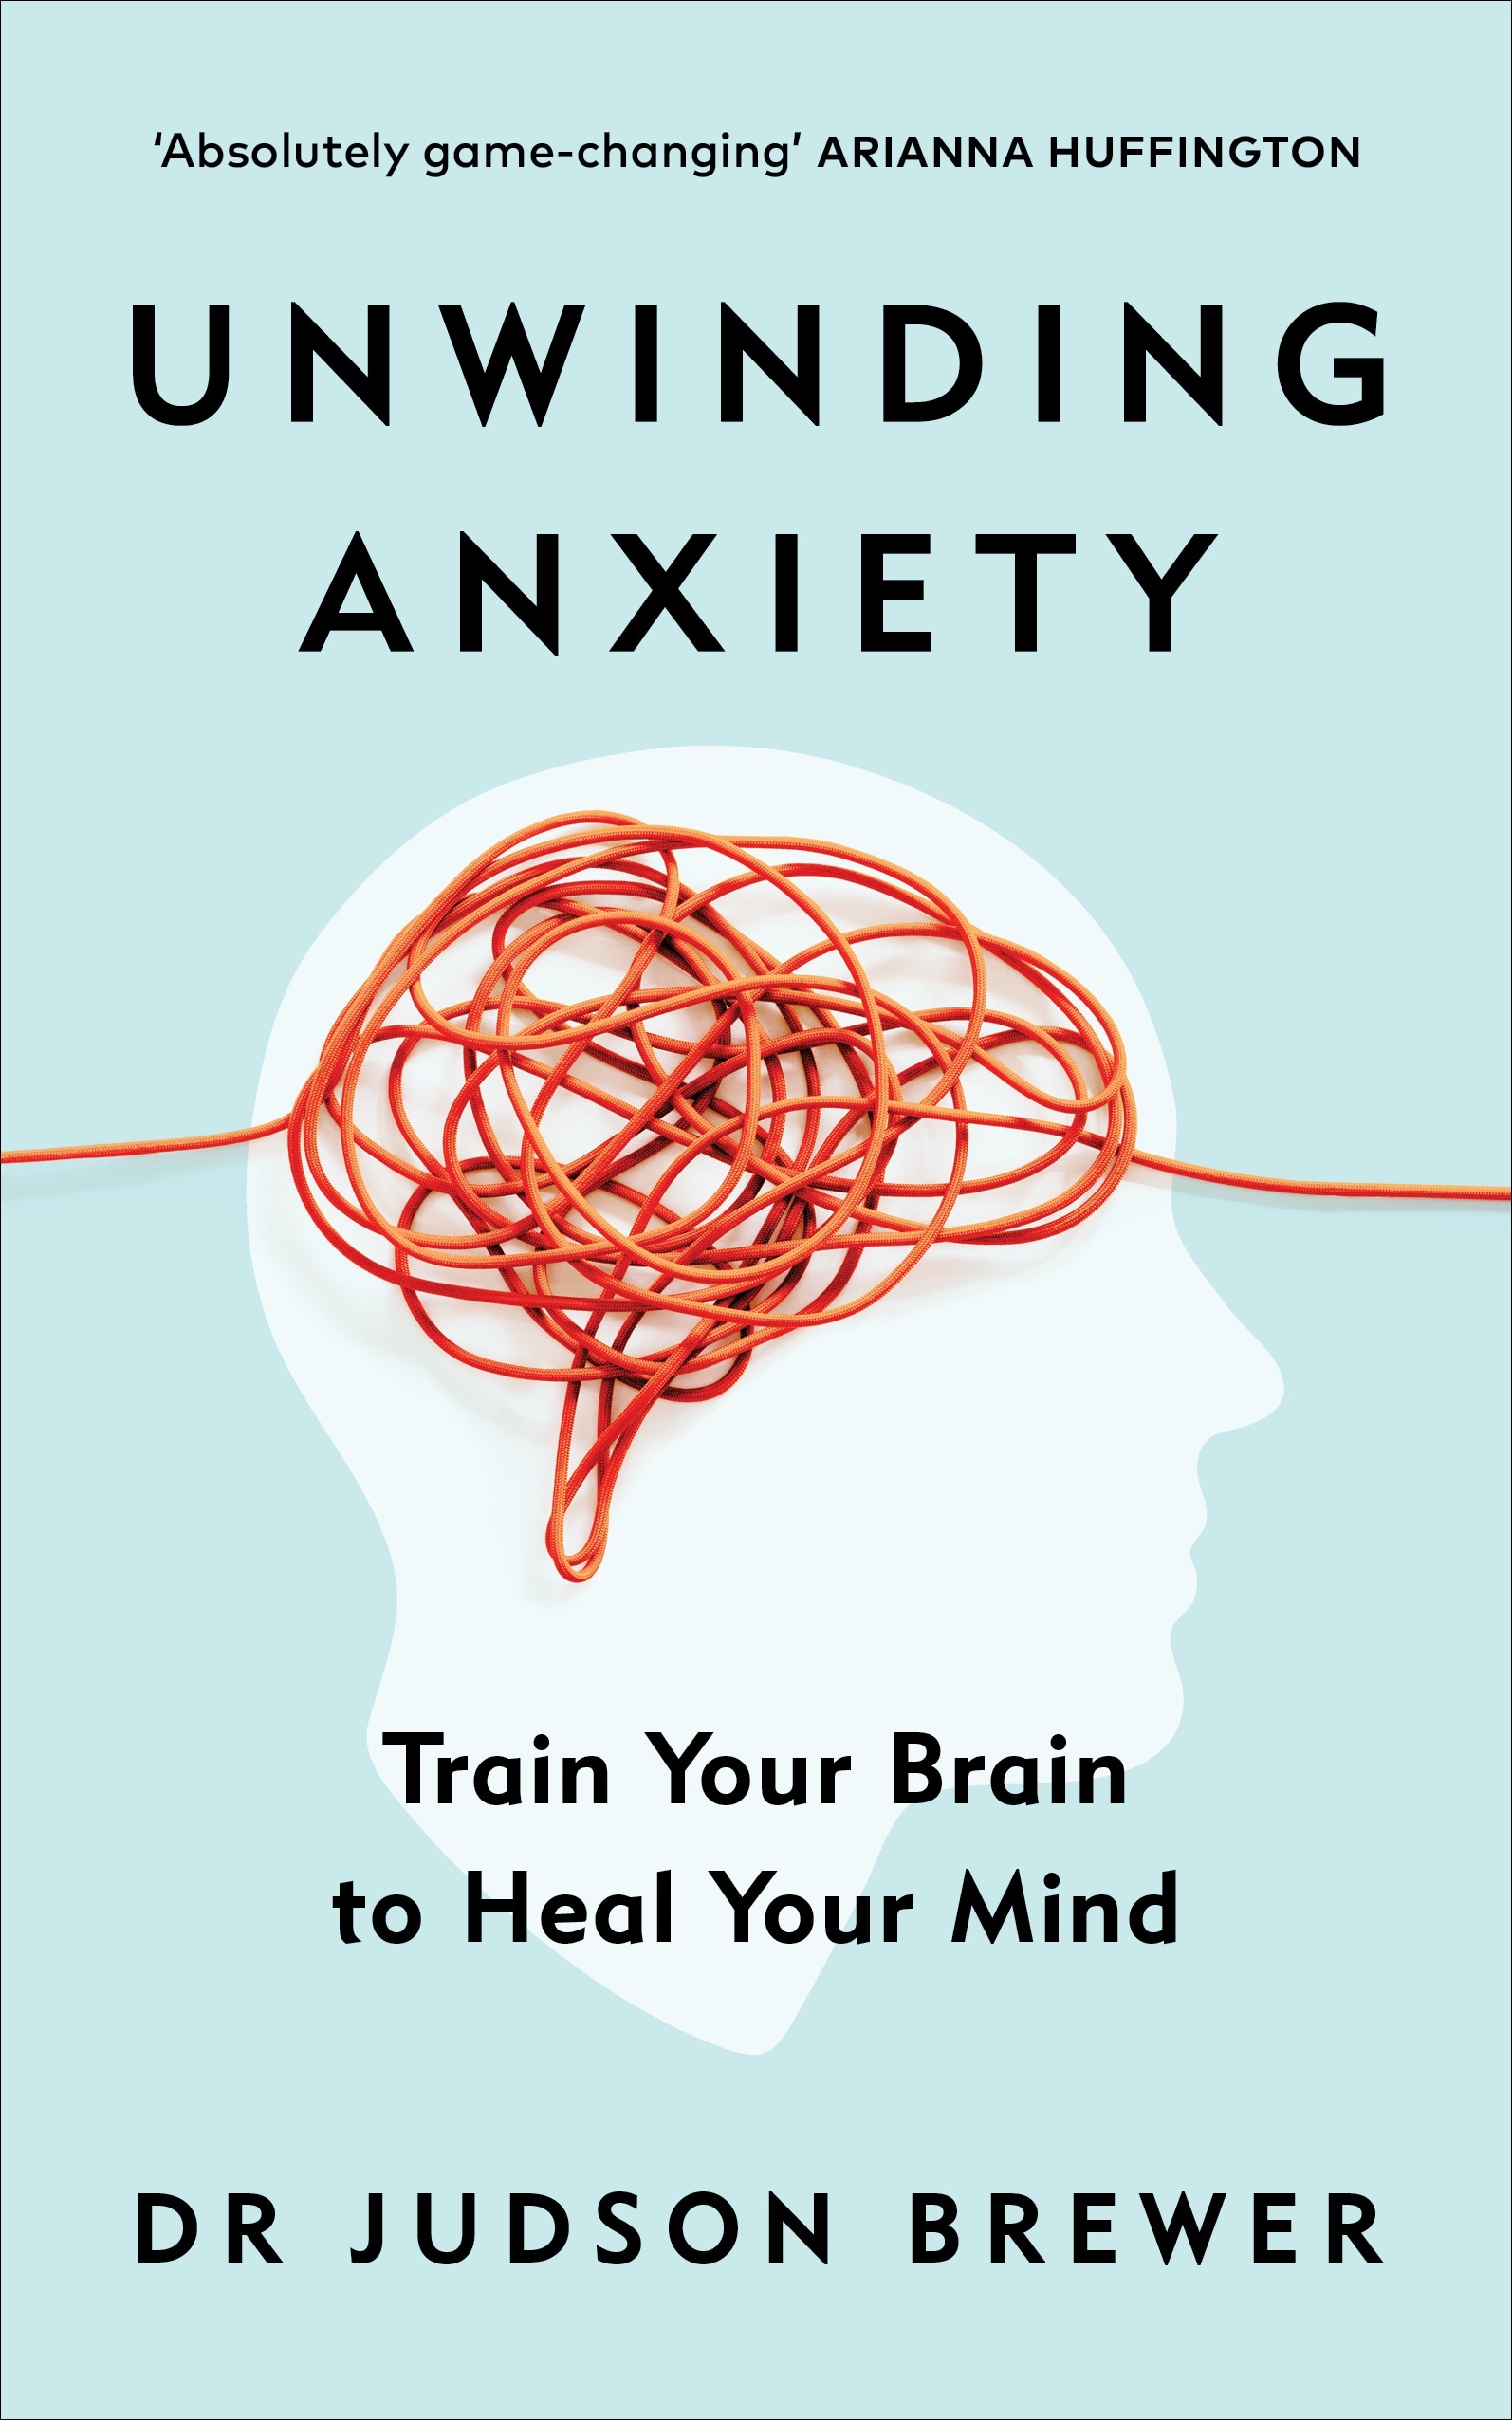 Book “Unwinding Anxiety” by Judson Brewer — March 11, 2021